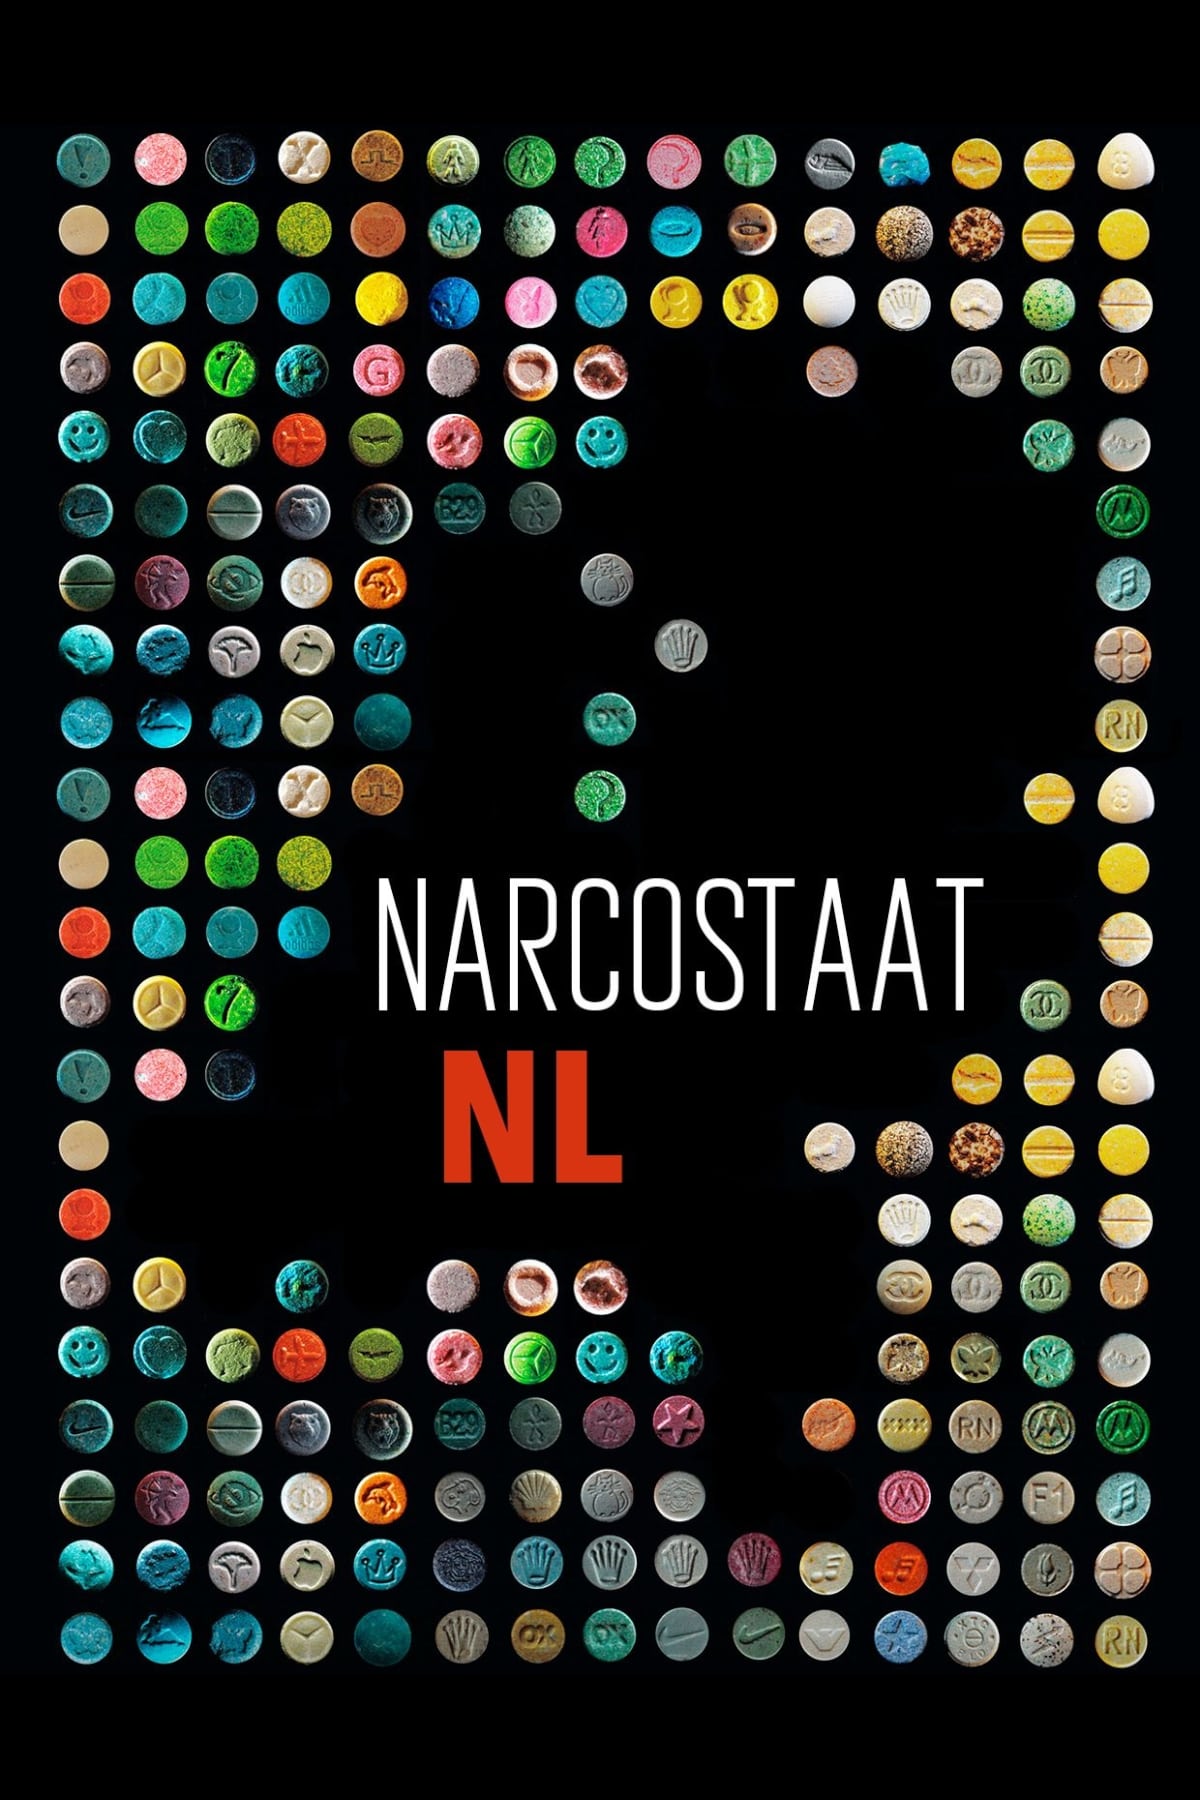 Narcostaat NL